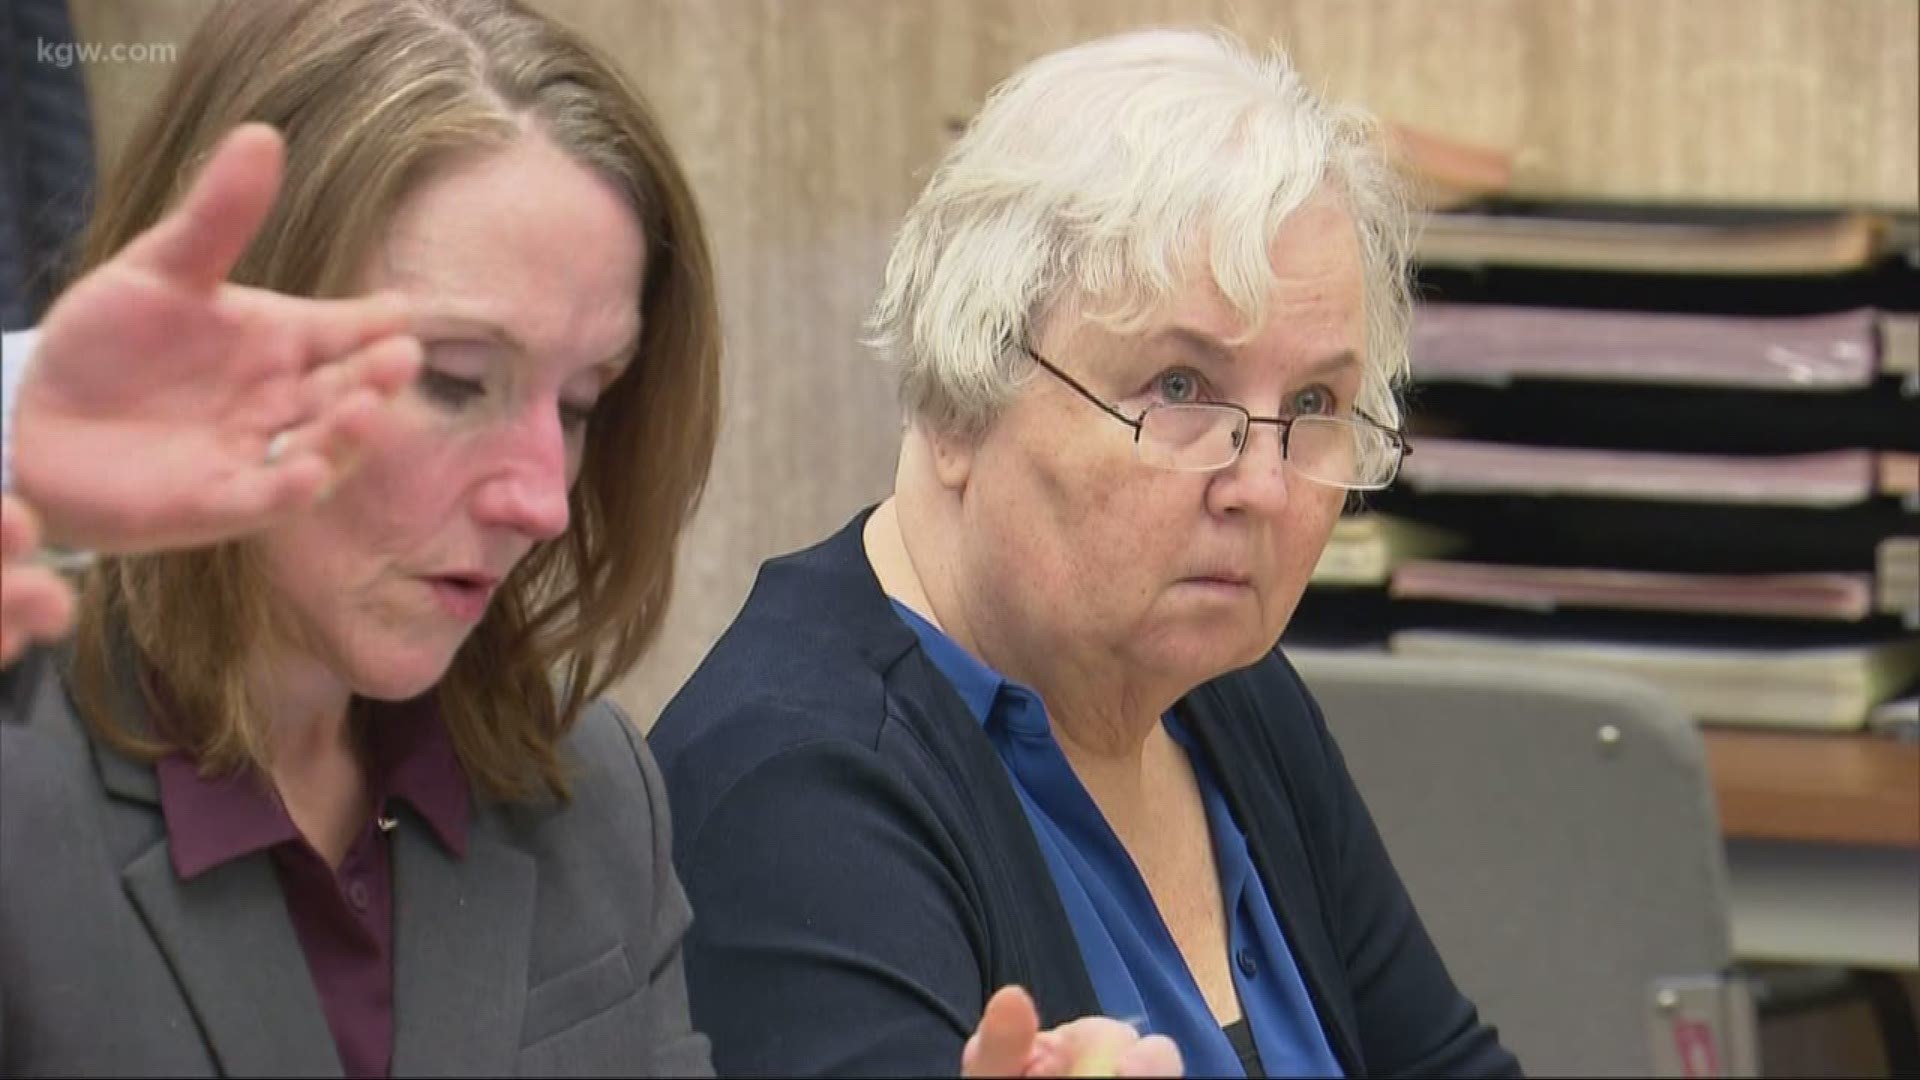 Court documents unsealed Friday provide more details into the arrest of Nancy Crampton-Brophy, who is accused of killing her husband at the Oregon Culinary Institute last summer.